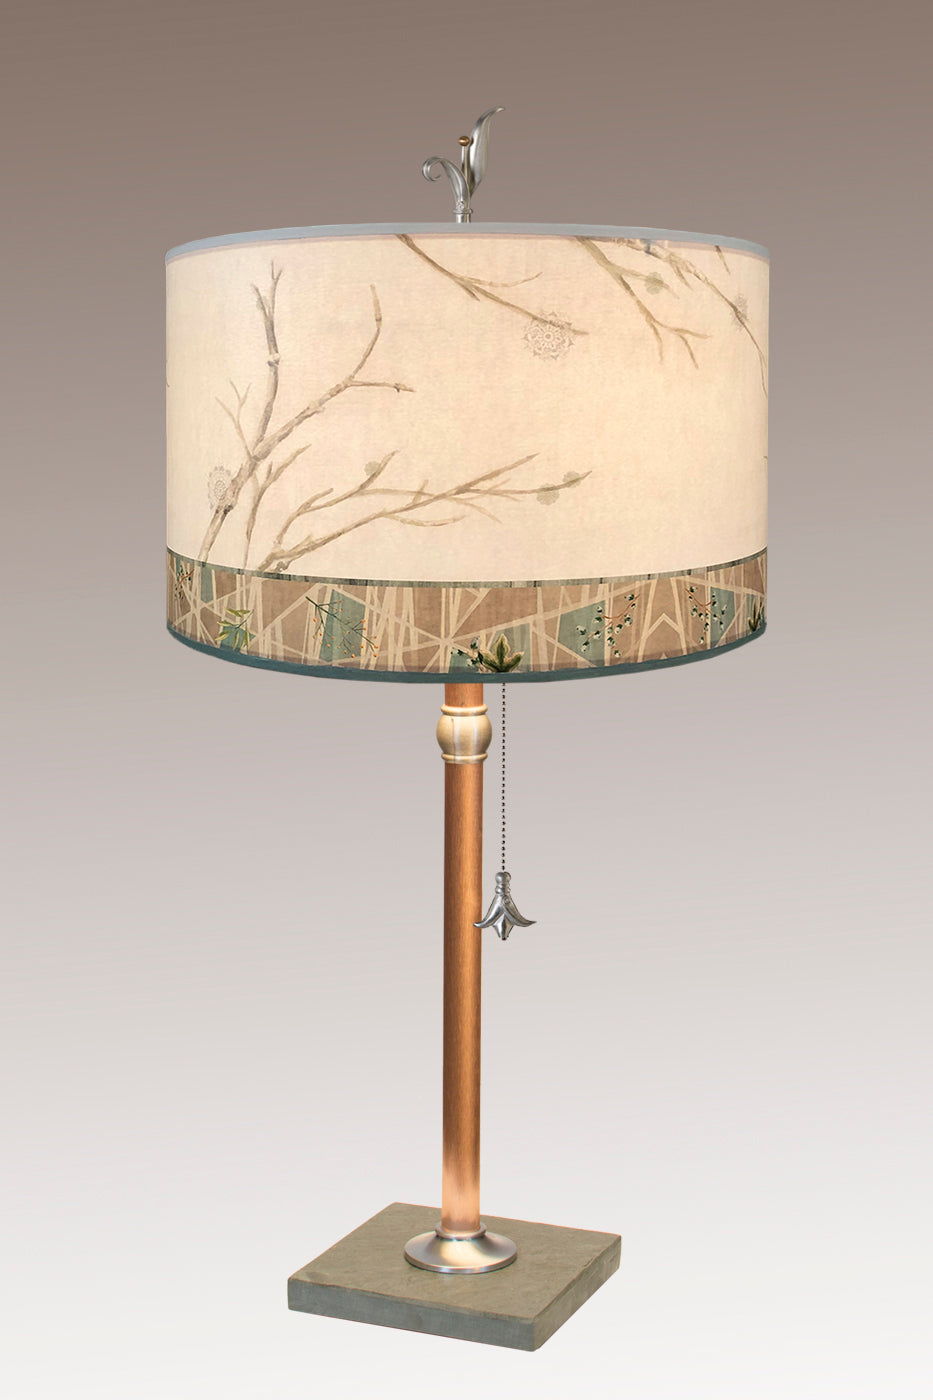 Janna Ugone & Co Table Lamps Copper Table Lamp with Large Drum Shade in Prism Branch